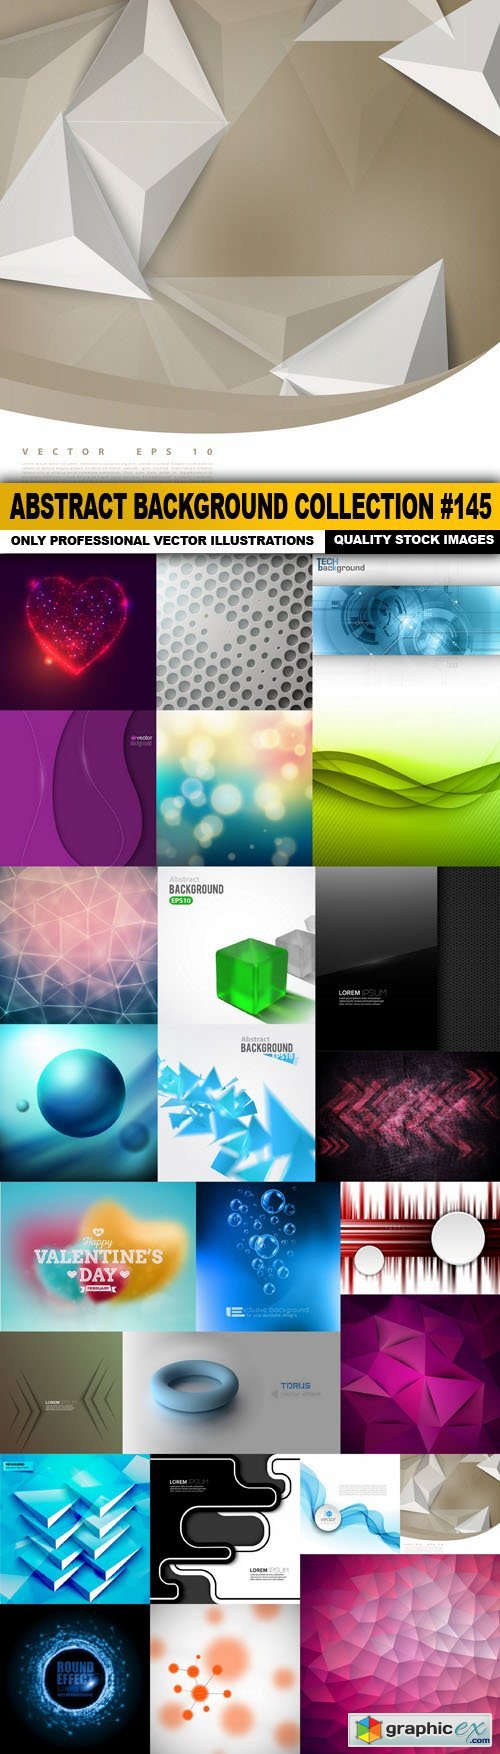 Abstract Background Collection #145